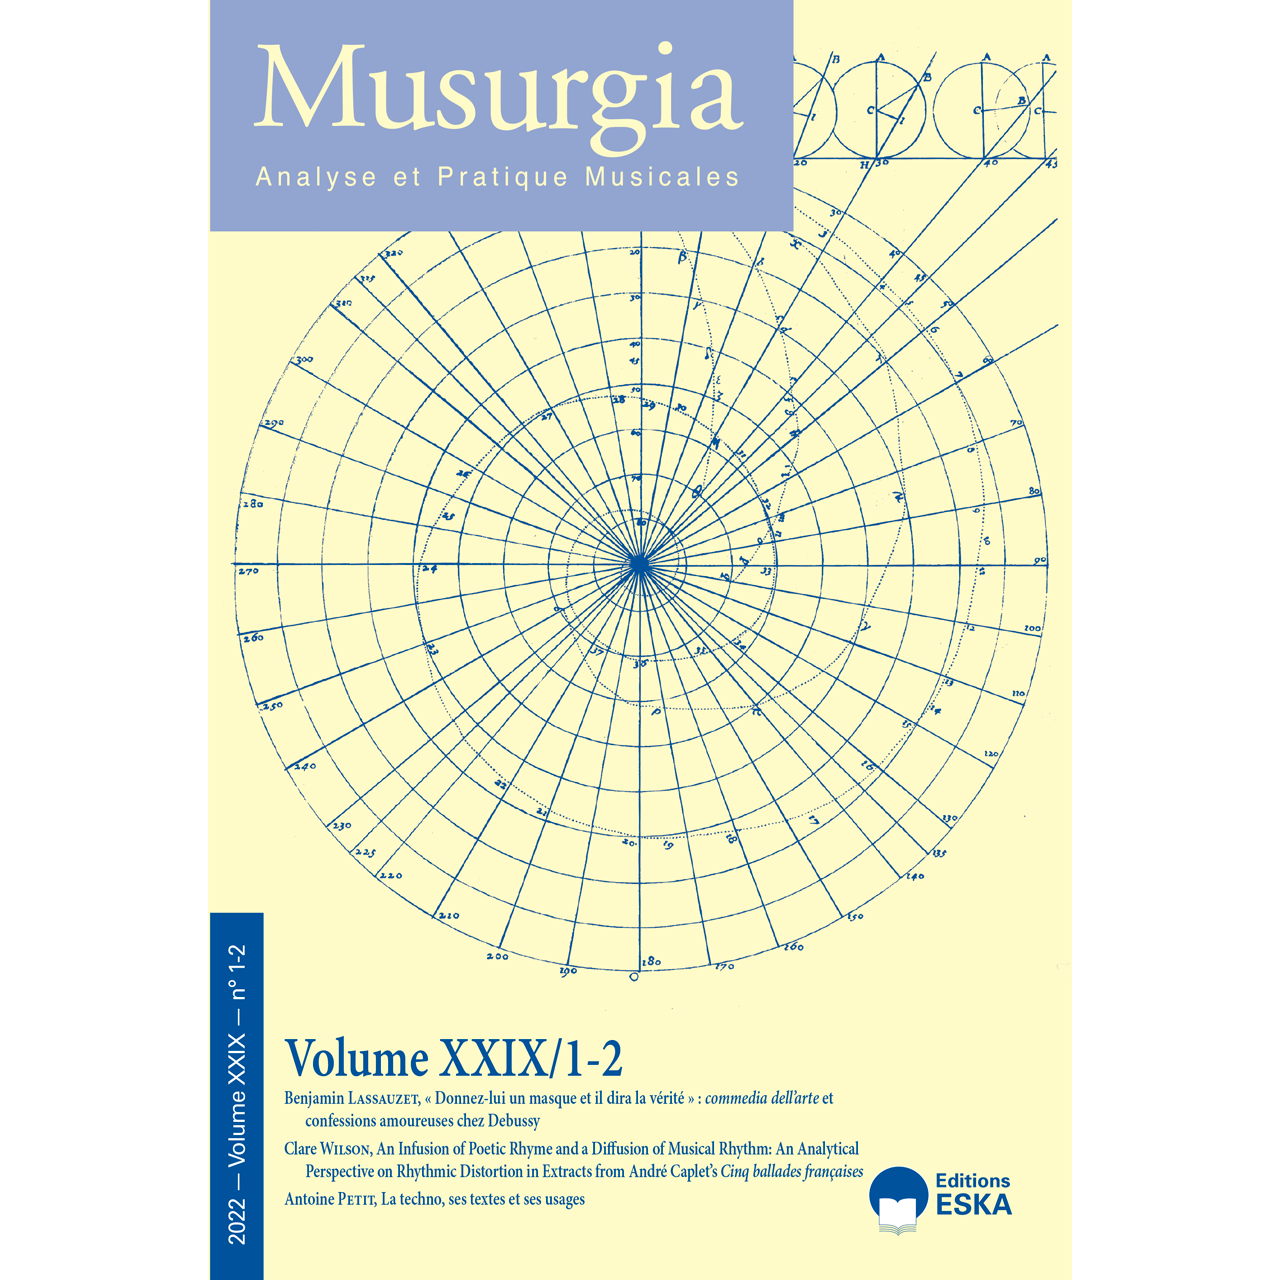 You are currently viewing Musurgia XXIX/1-2